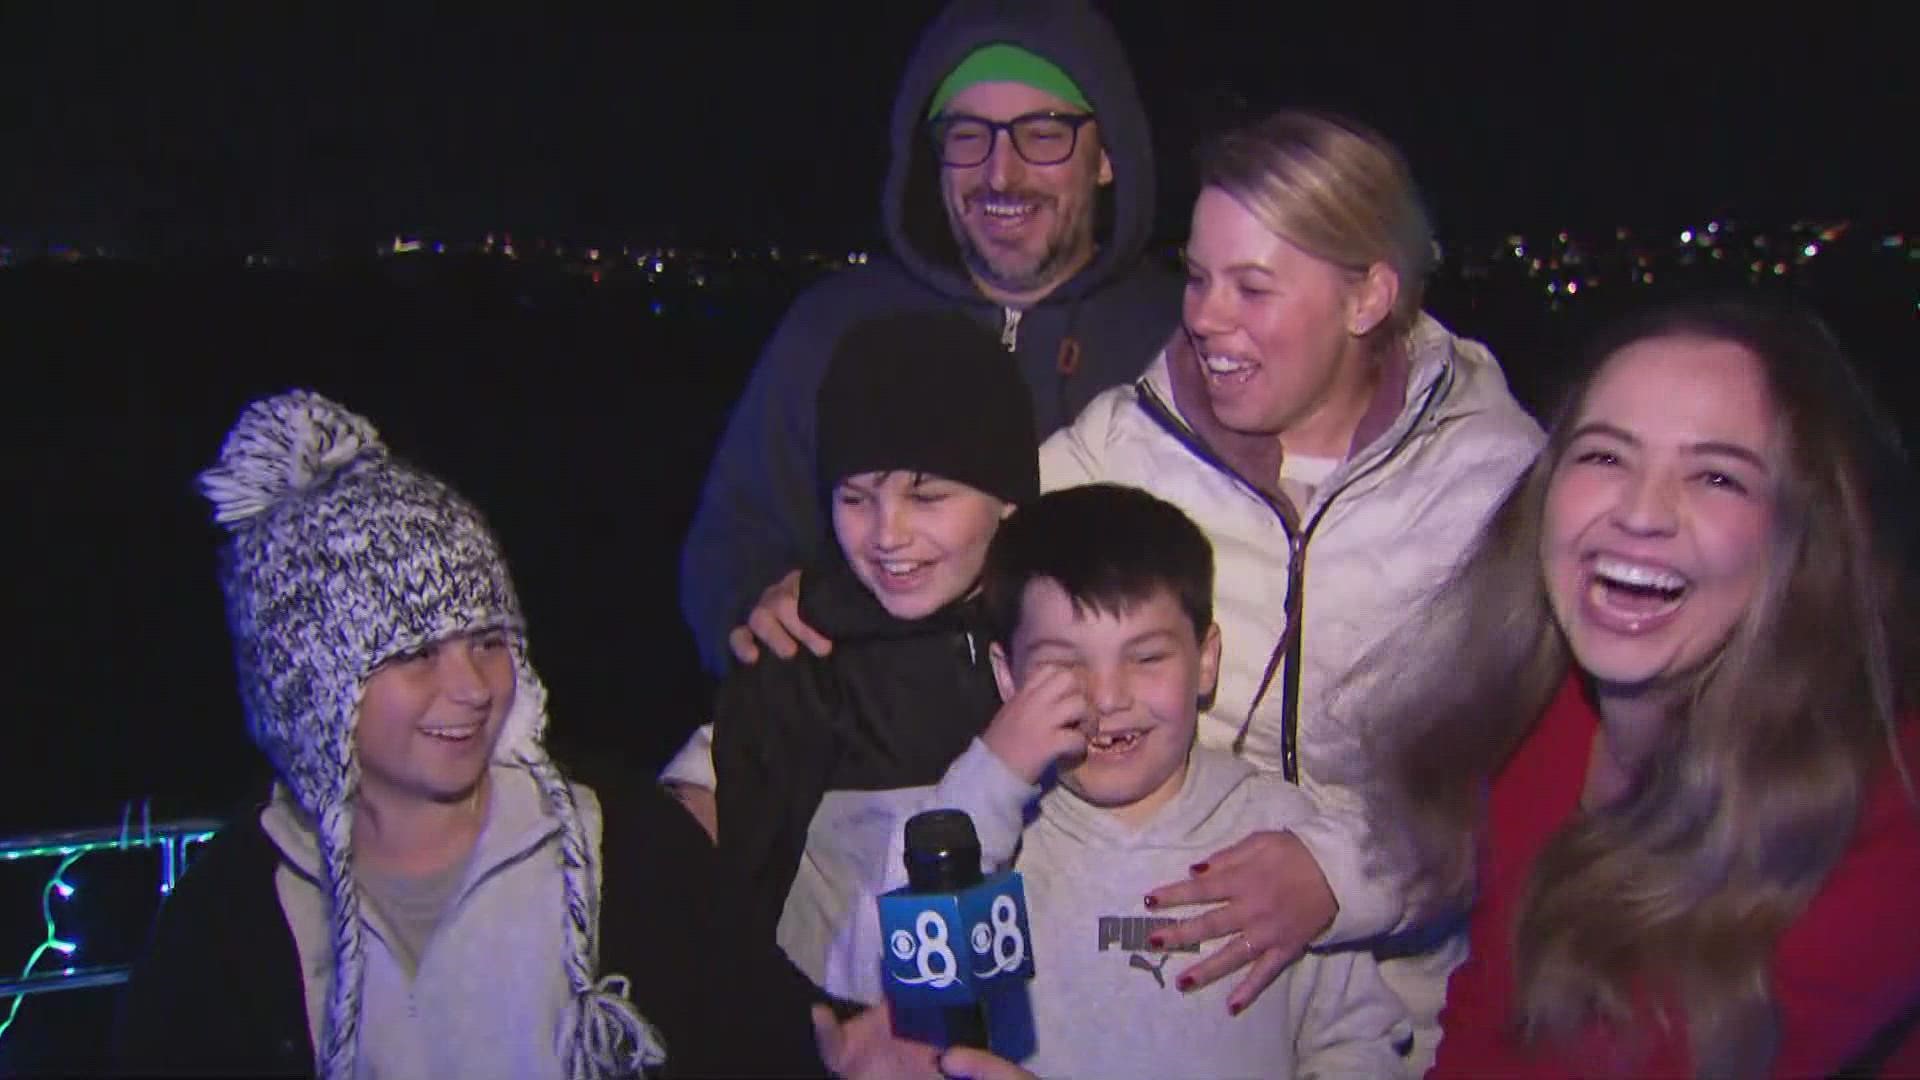 Mission Bay Boat Parade brings happy families and decorated boats out